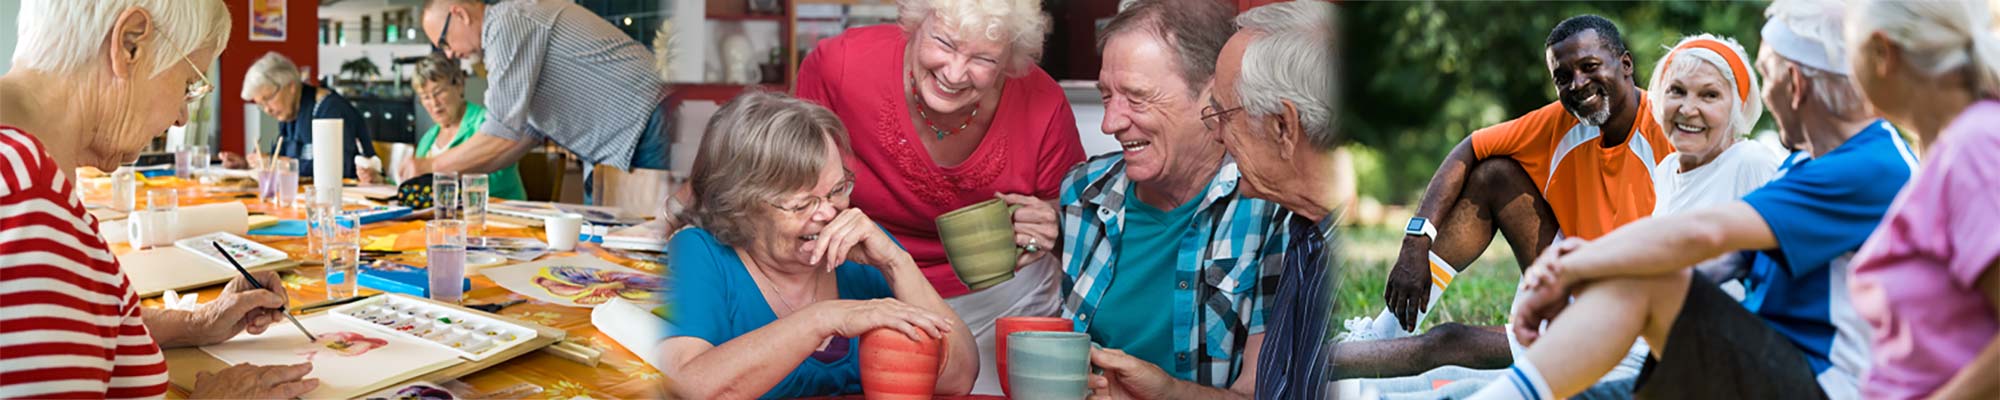 Three images of elderly people in community laughing and hanging out